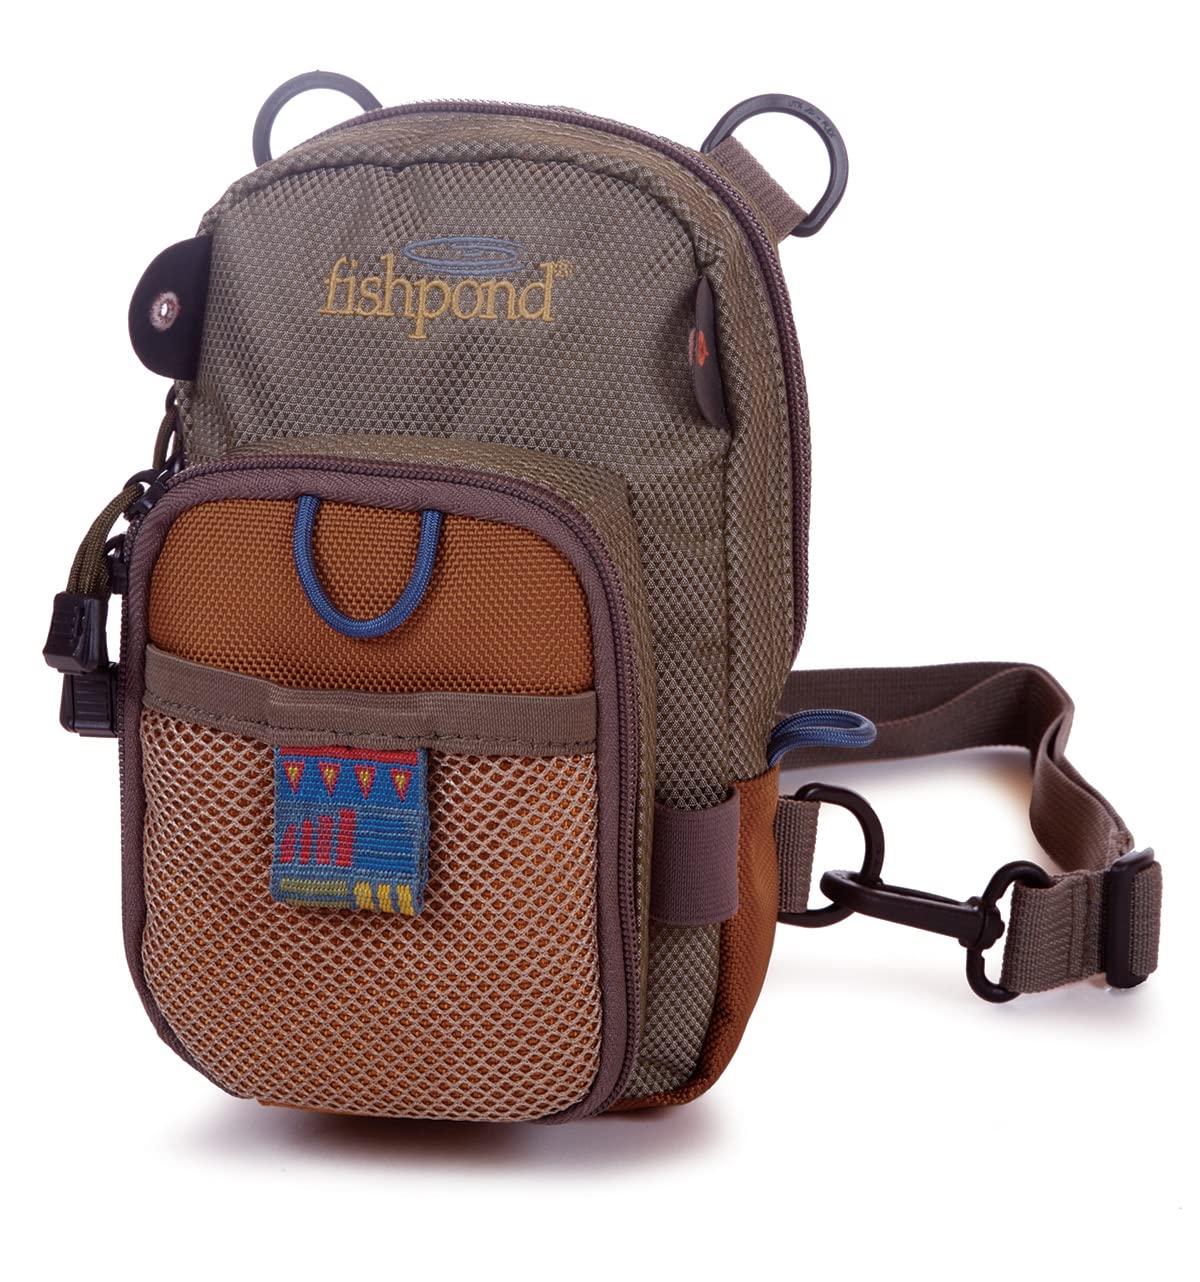 fishpond San Juan Vertical Fly Fishing Chest Pack Bag with Padded